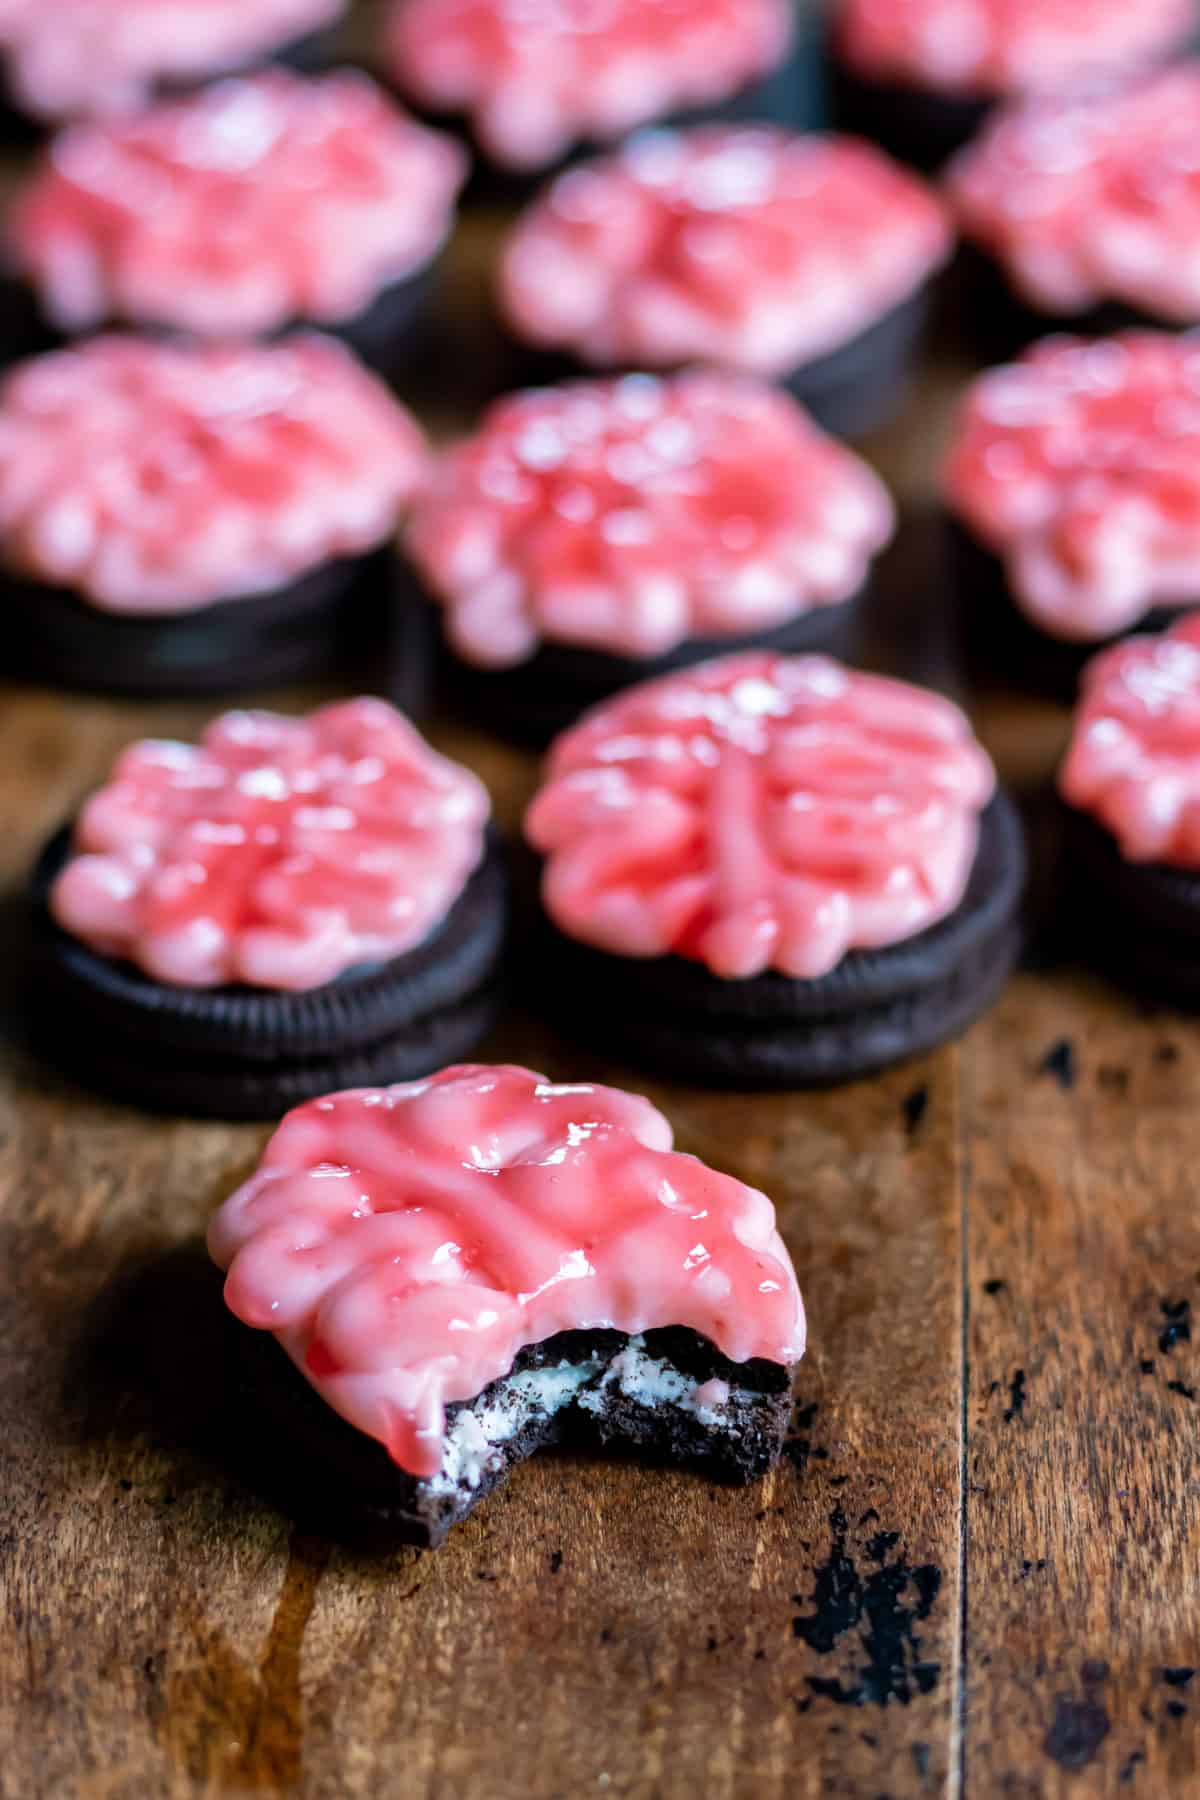 Cookie with a bite out in front of rows of Oreo cookies decorated like brains for Halloween.